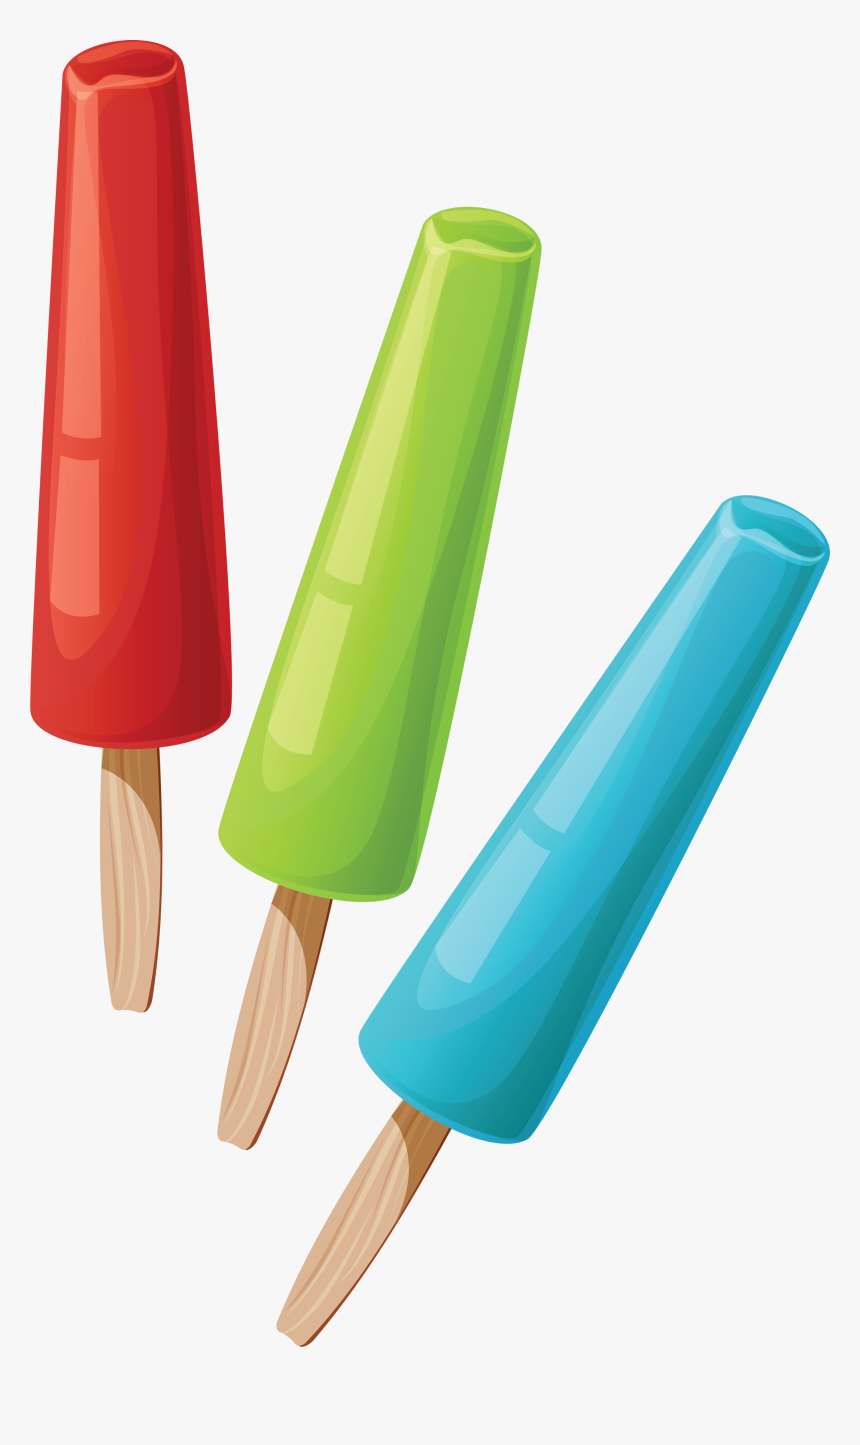 Fruit Ice Cream Png Image - Transparent Background Ice Lollies Clip Art, Png Download, Free Download